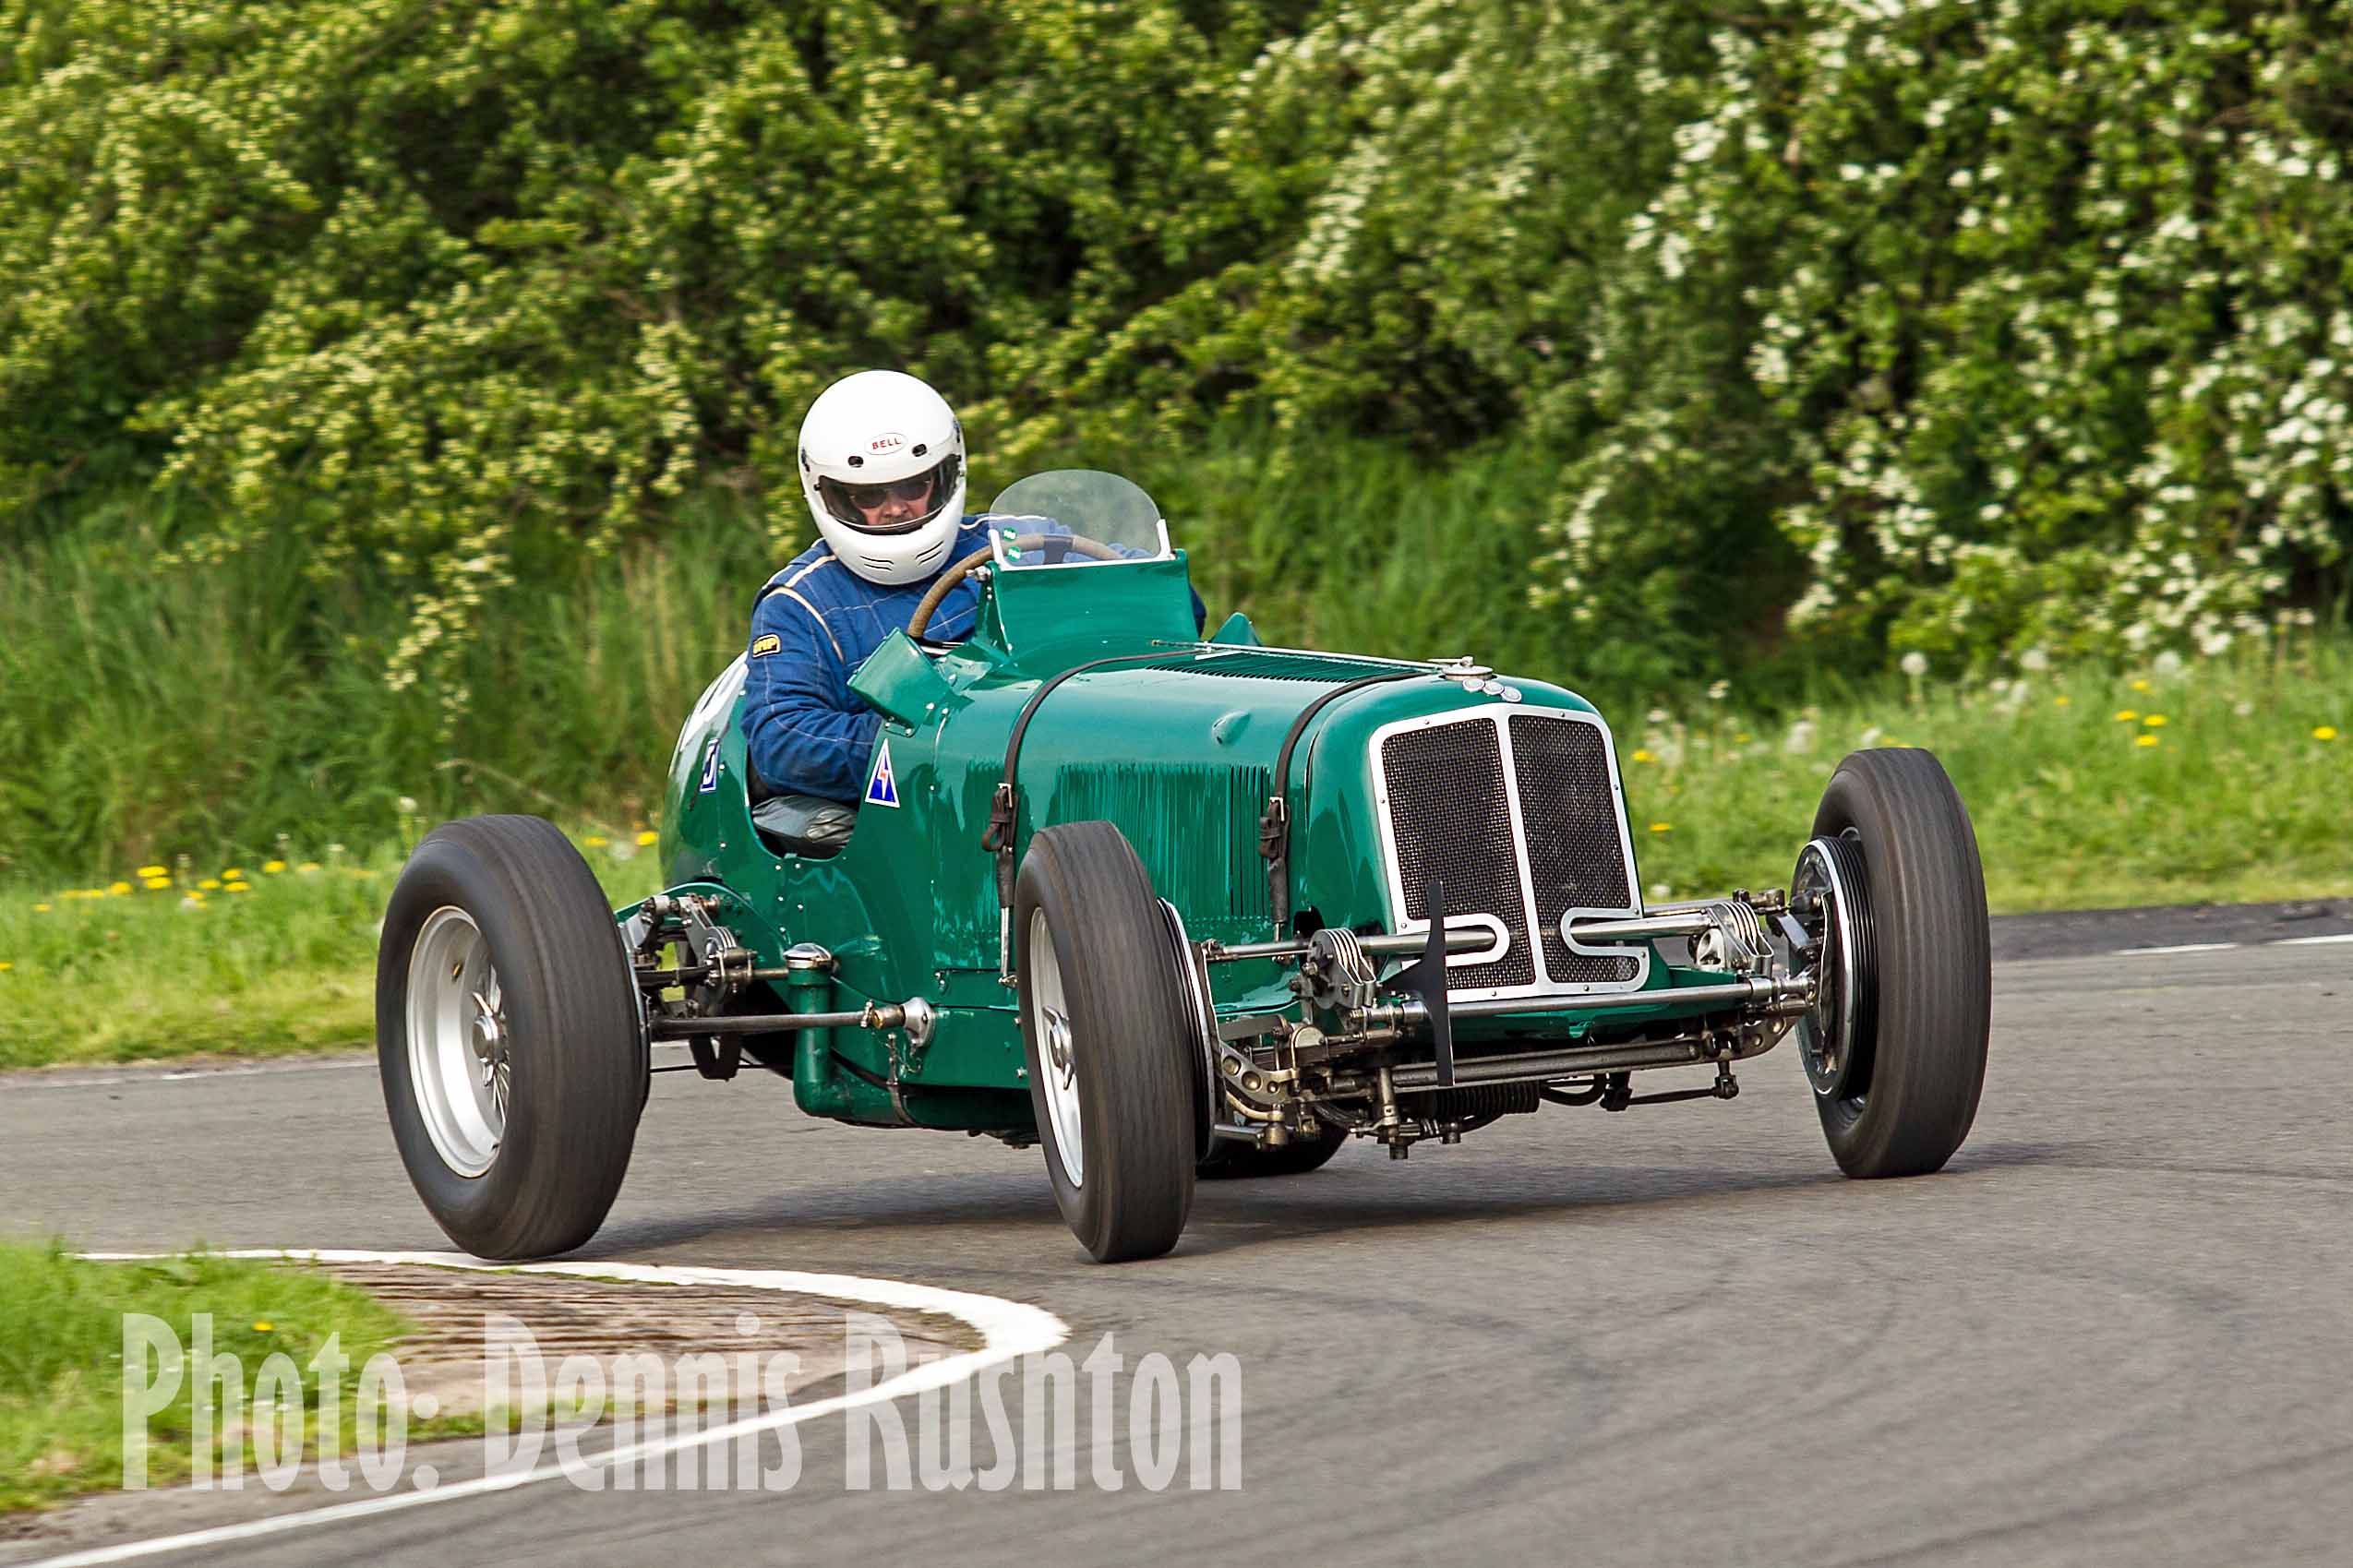 The start of the VSCC 2015 Speed Season is just around the corner! cover